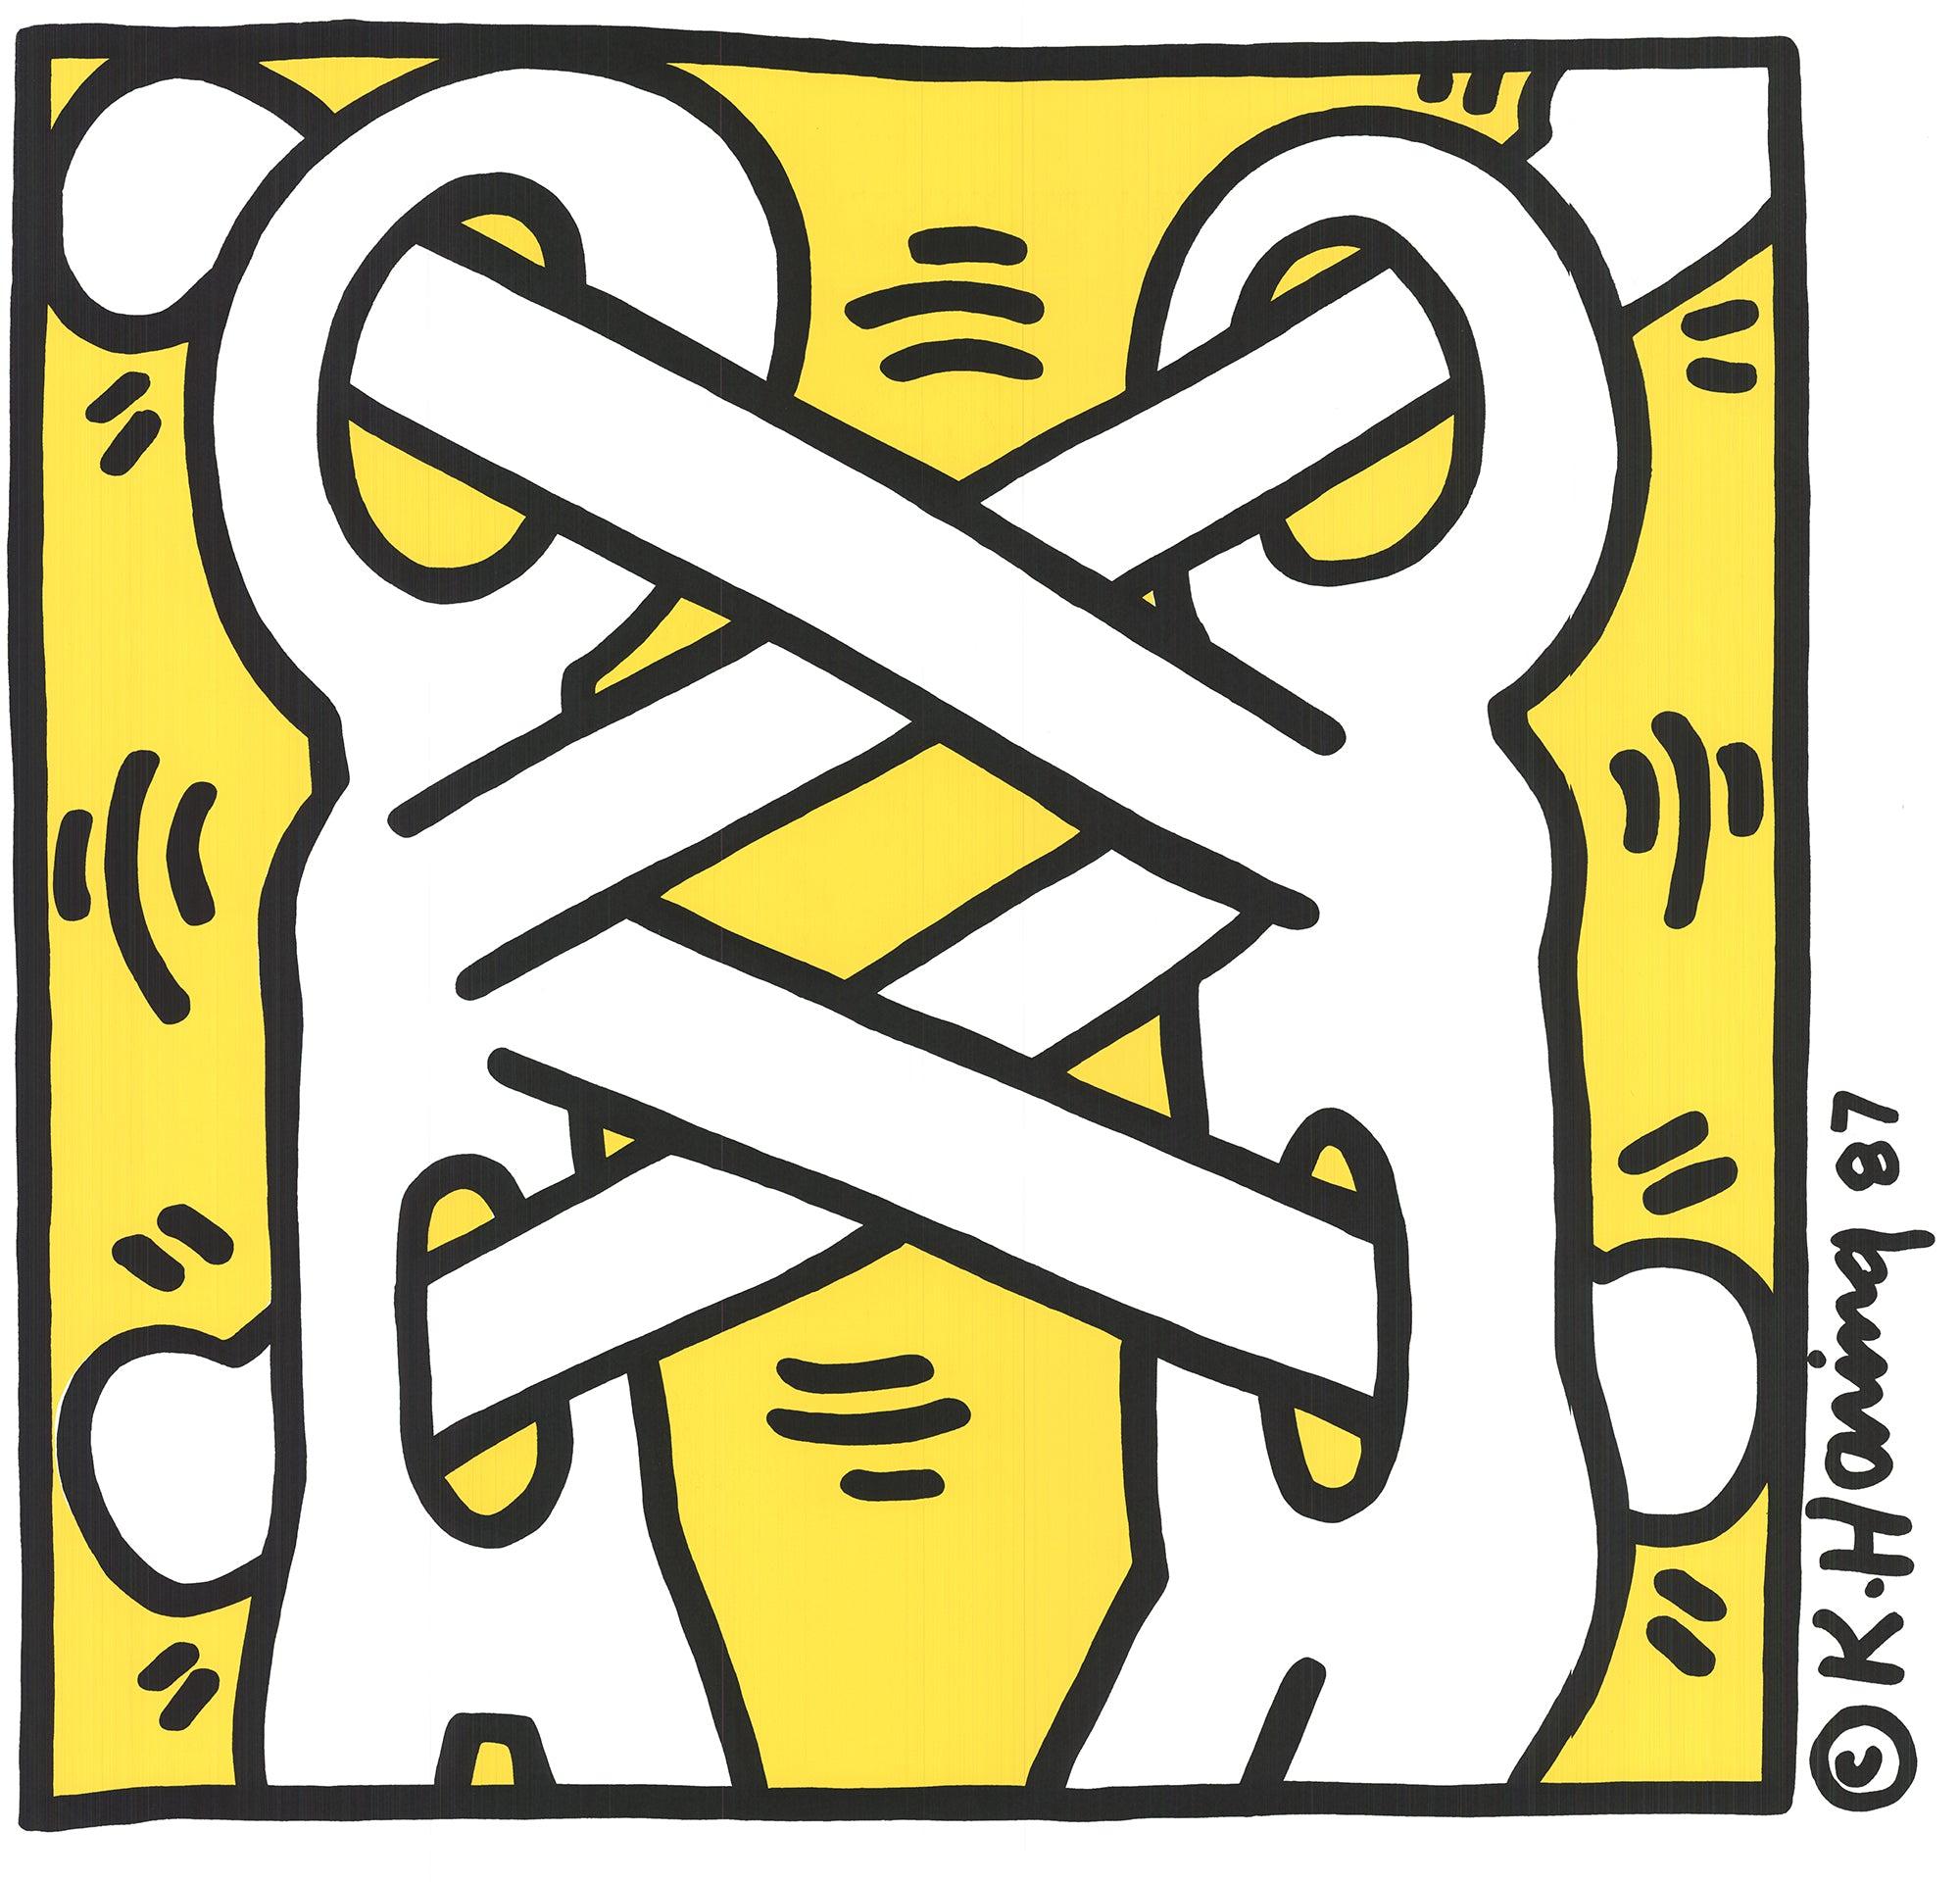 KEITH HARING Art Attack on AIDS, 1988 - Pop Art Print by Keith Haring